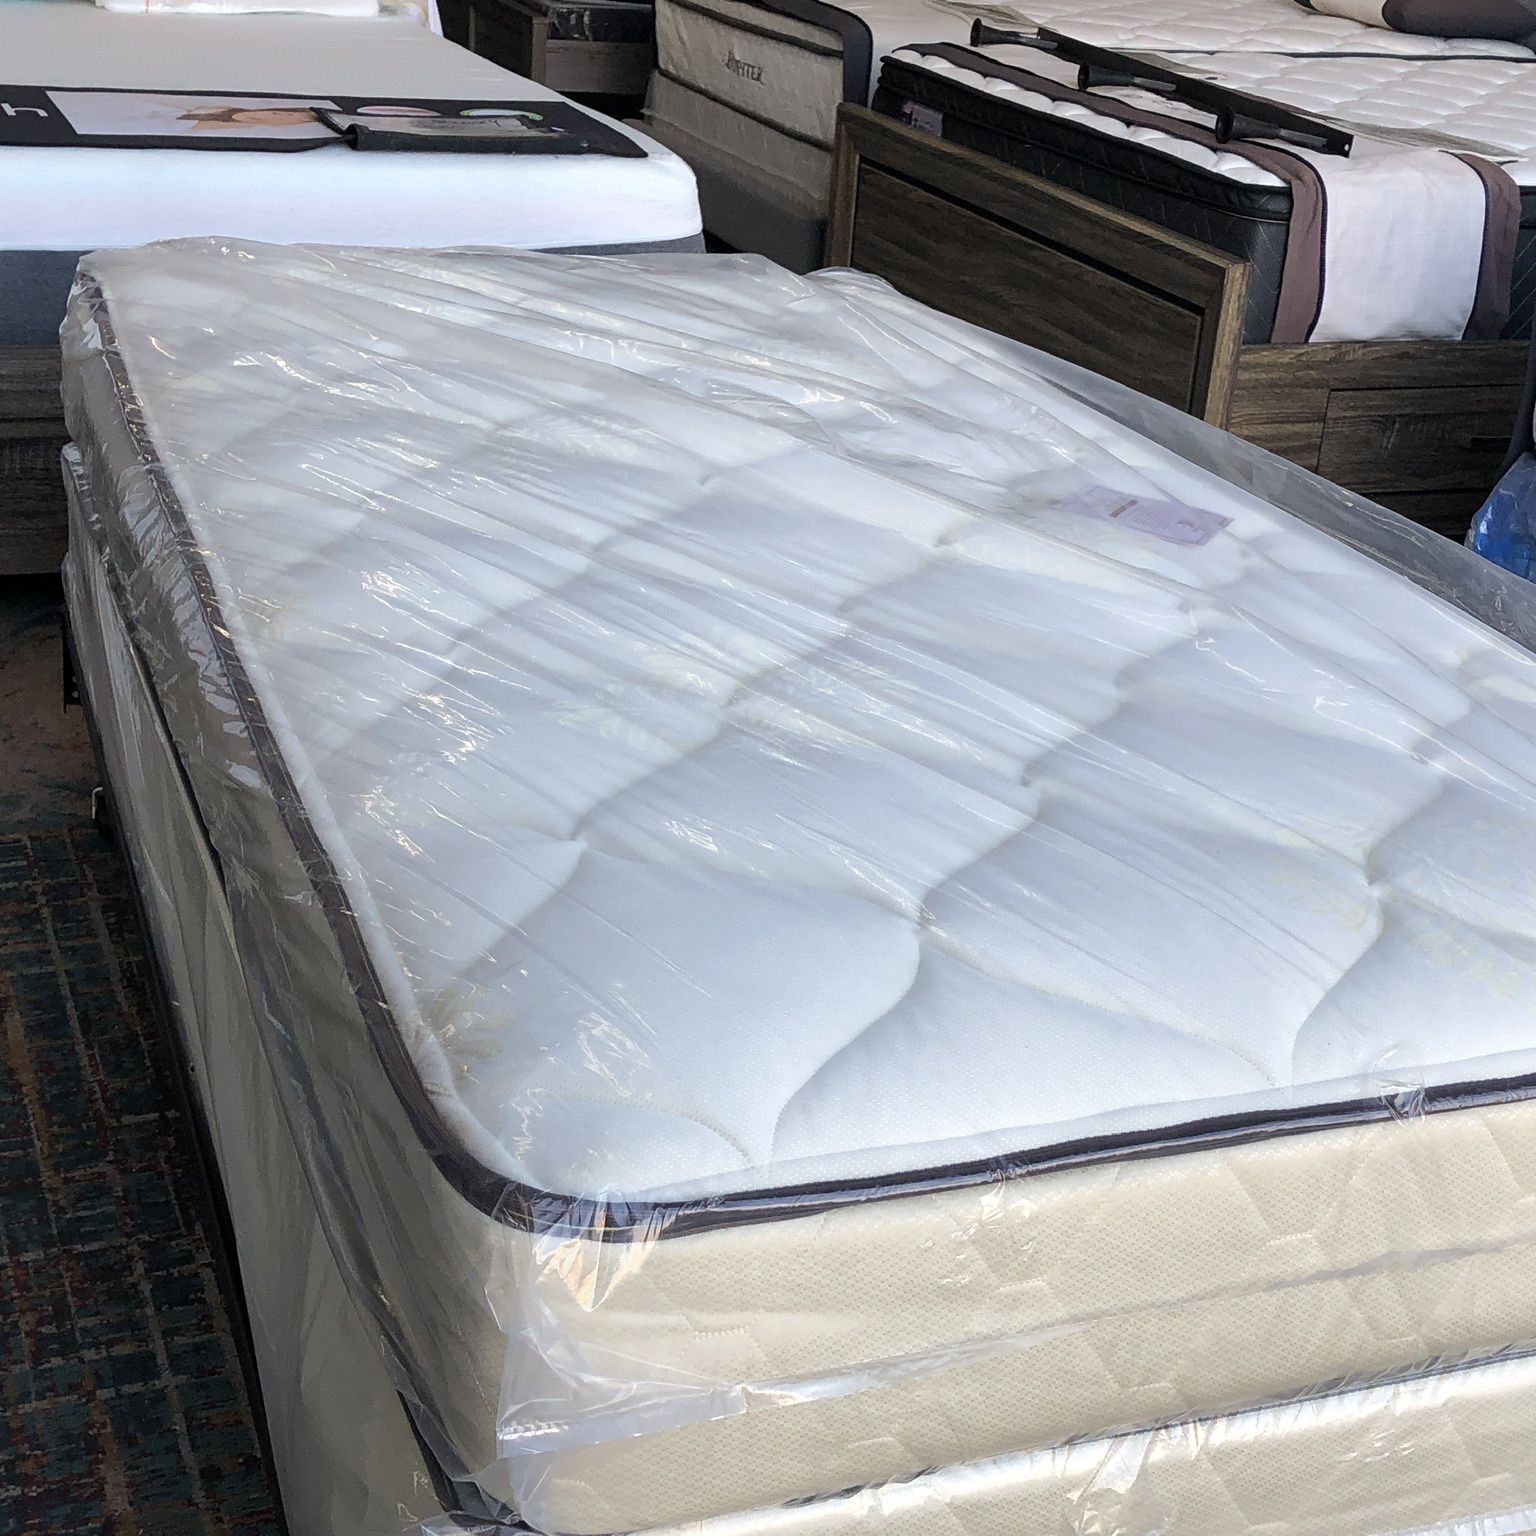 Twin Mattresses And Other Sizes Available- best Mattress Prices 